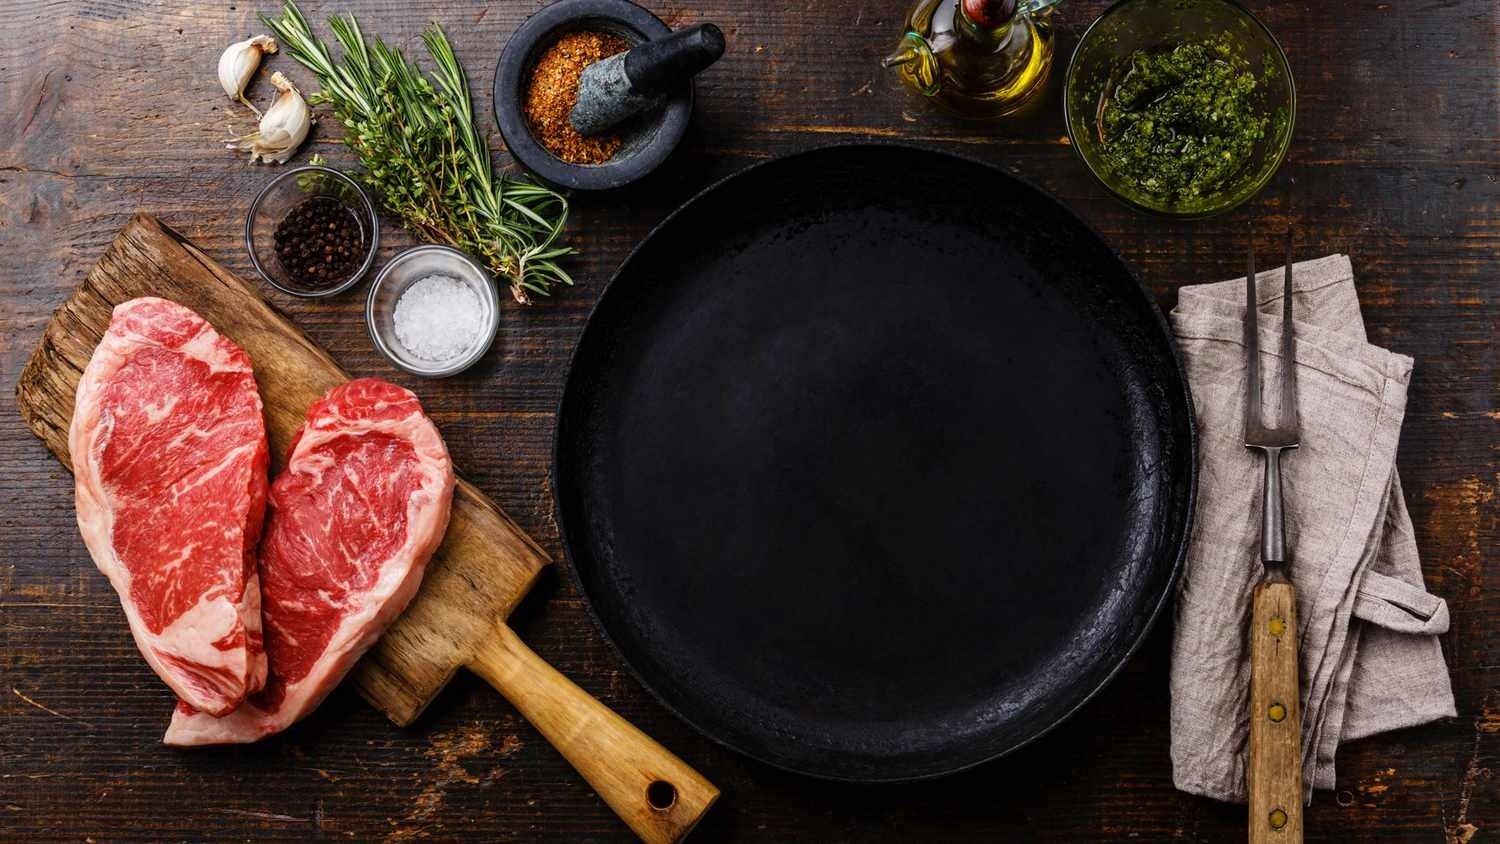 https://recipes.net/wp-content/uploads/2023/10/how-to-cook-a-steak-without-a-grill-or-cast-iron-skillet-1698067972.jpg